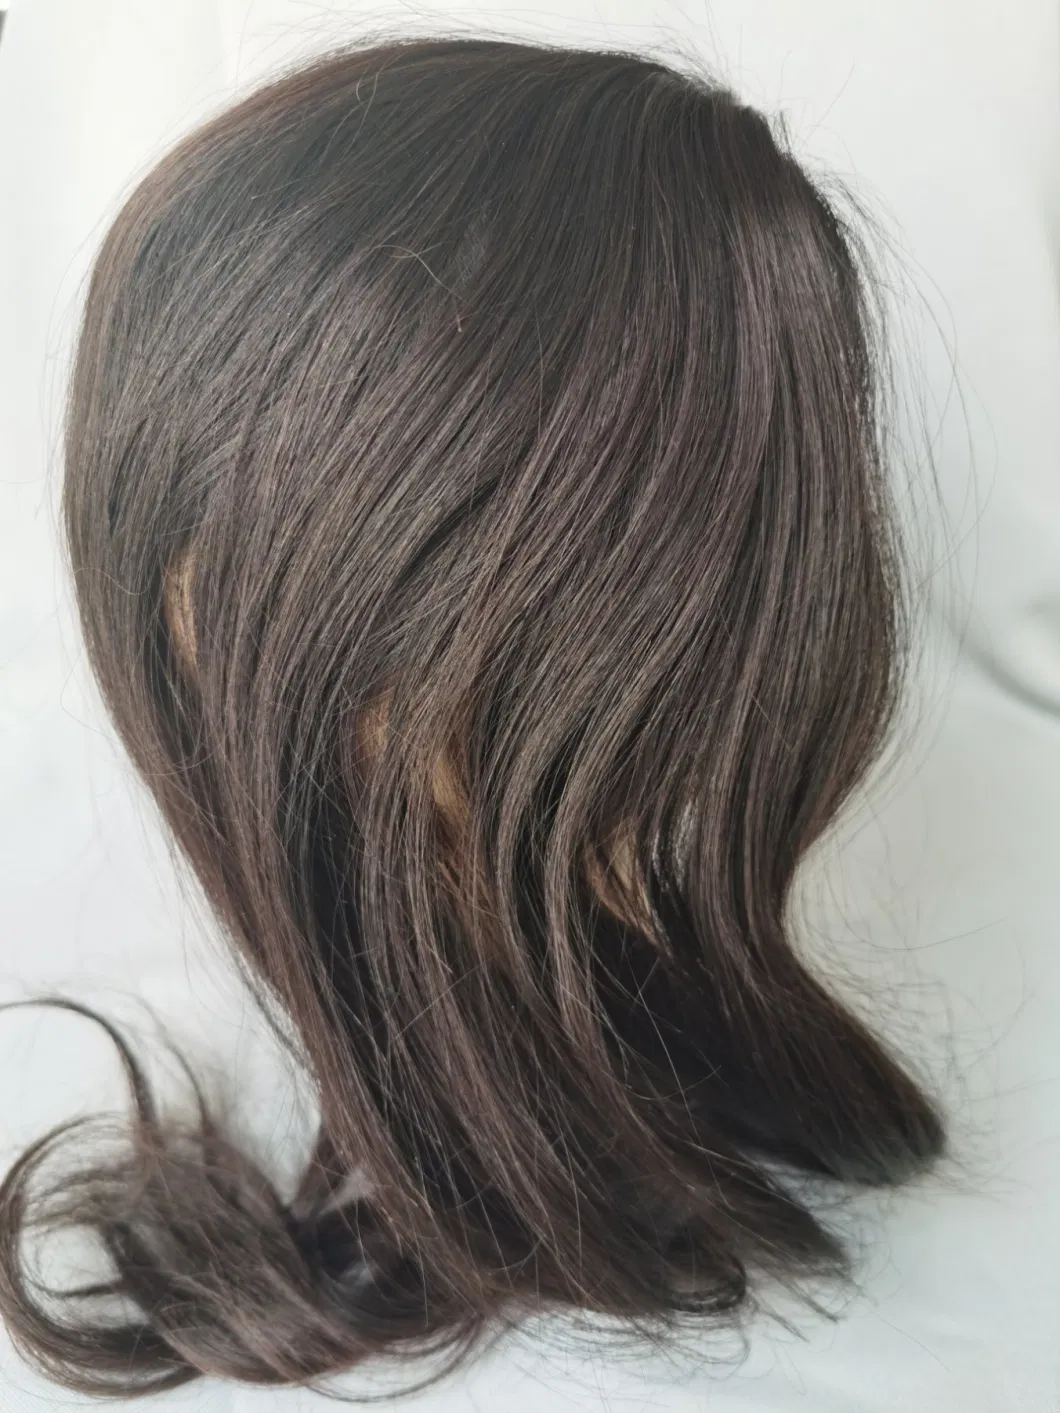 Most-Natural Growing-Looking Custom-Made Silk-Top Injected Lace Human Hair Toupees Made of Remy-Human-Hair